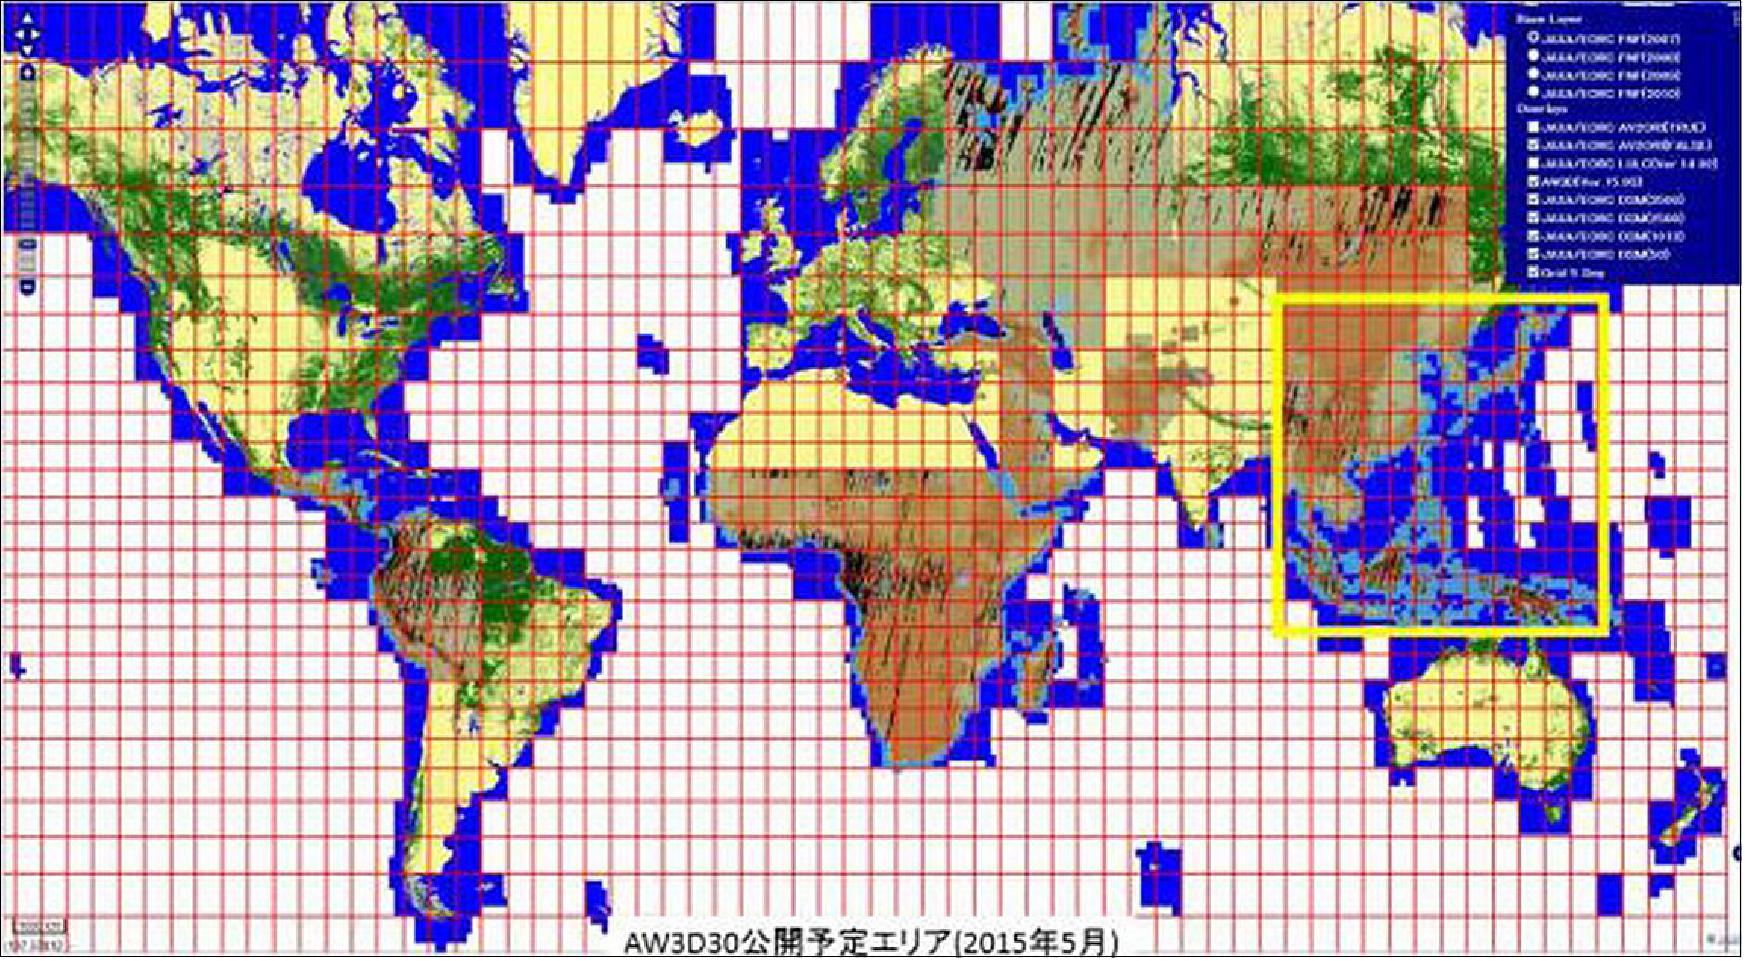 Figure 10: PRISM world elevation data (30 m mesh version); the yellow square indicates the area for the first publication (image credit: JAXA) 16)